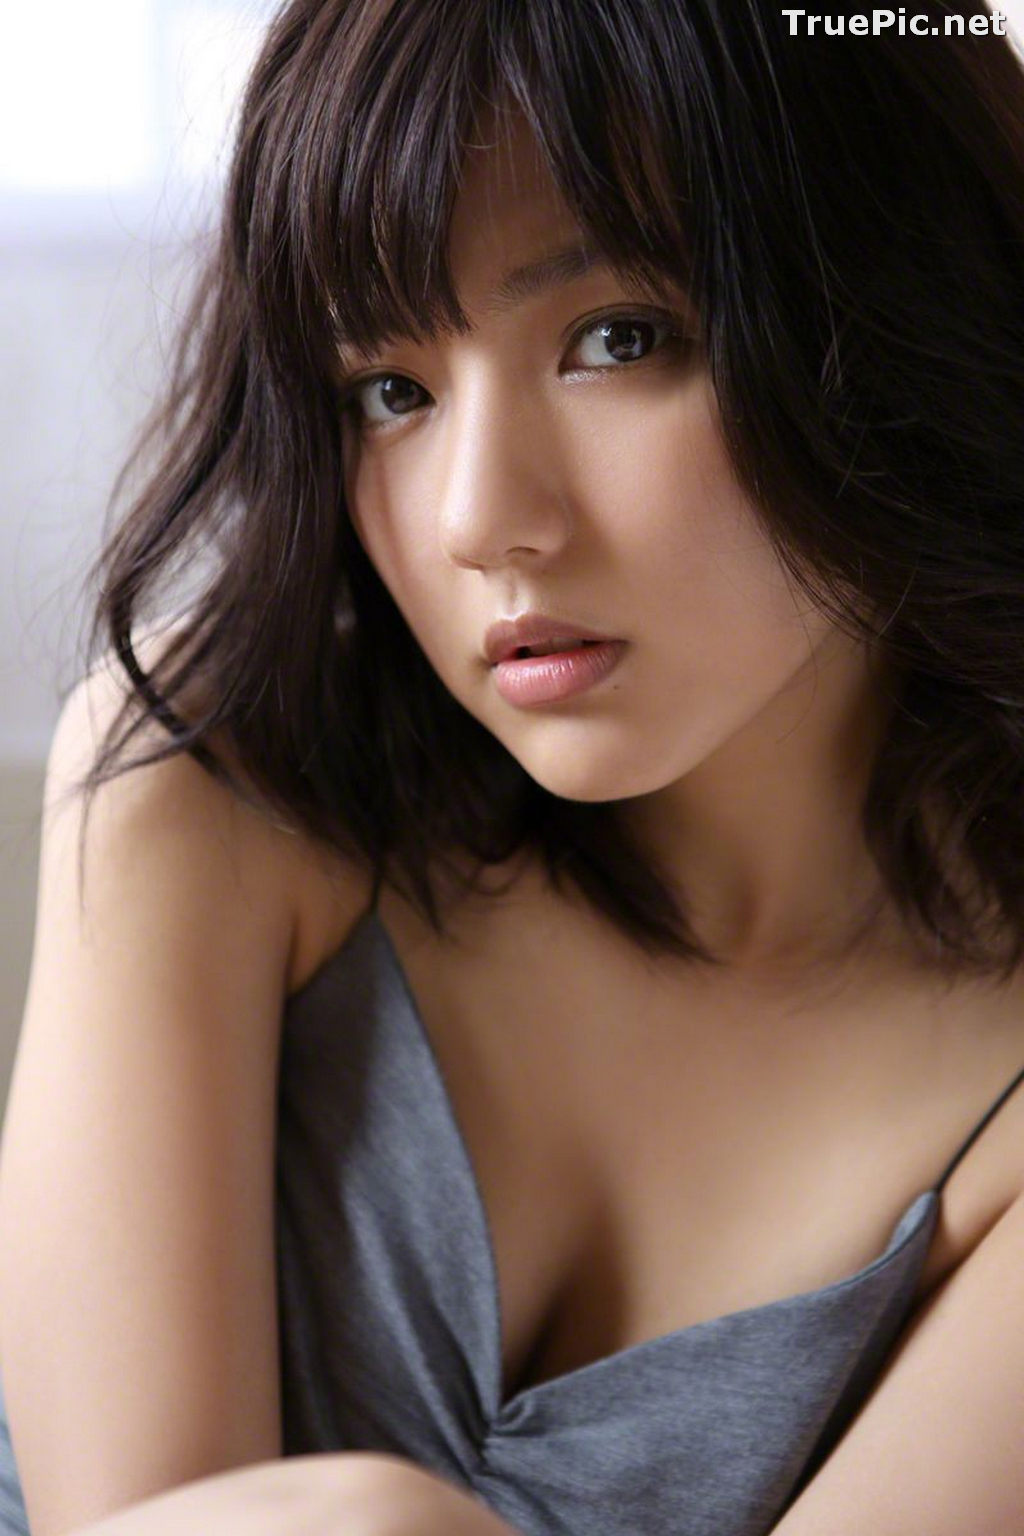 Image [WBGC Photograph] No.131 - Japanese Singer and Actress - Erina Mano - TruePic.net - Picture-175